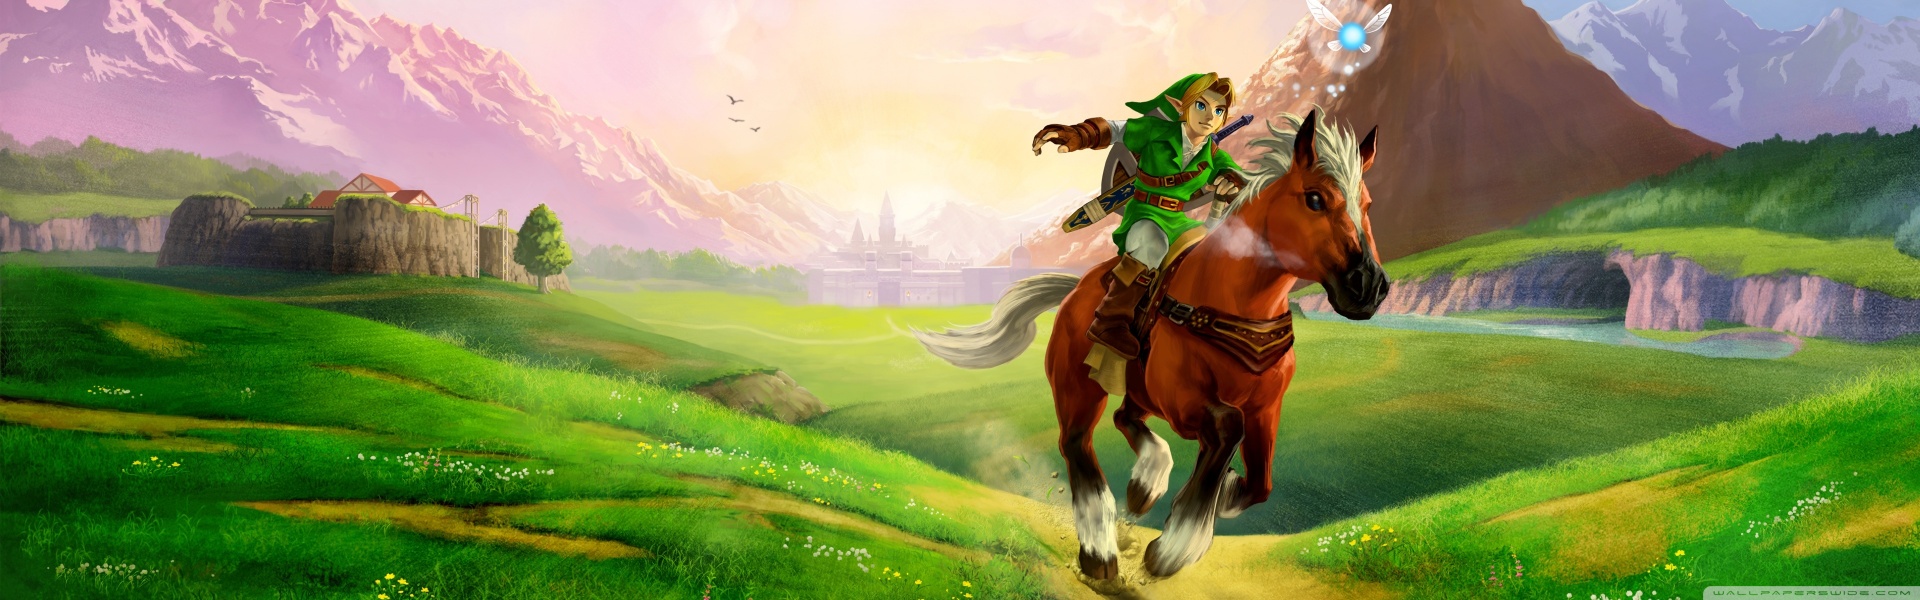 The Legend Of Zelda Ocarina Of Time 3d Wallpapers | Hd Wallpapers